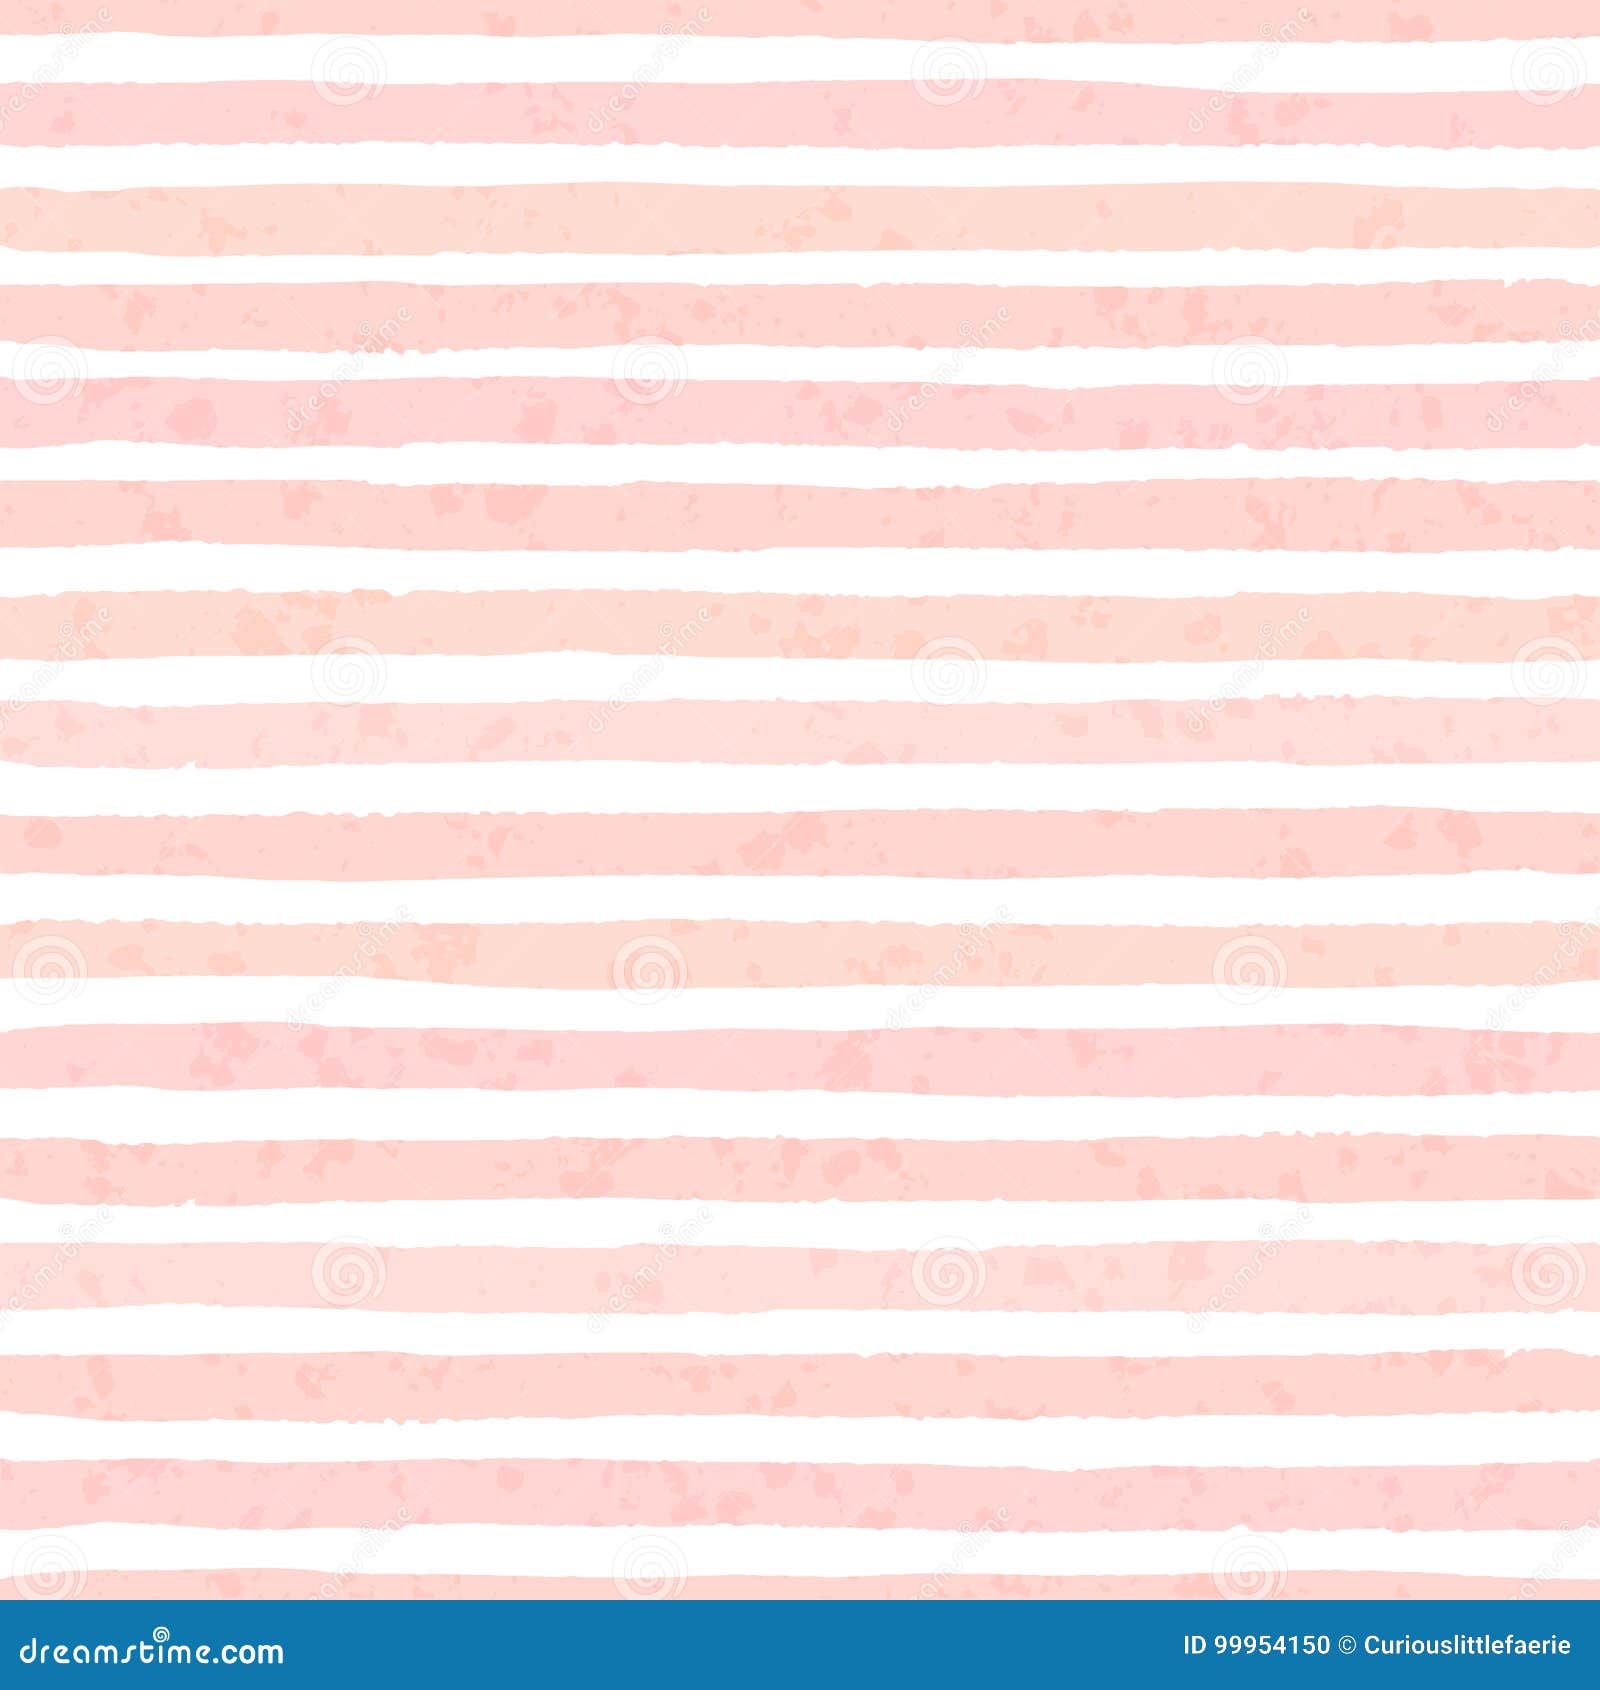 textured  grunge stripes of pastel pink colors seamless pattern